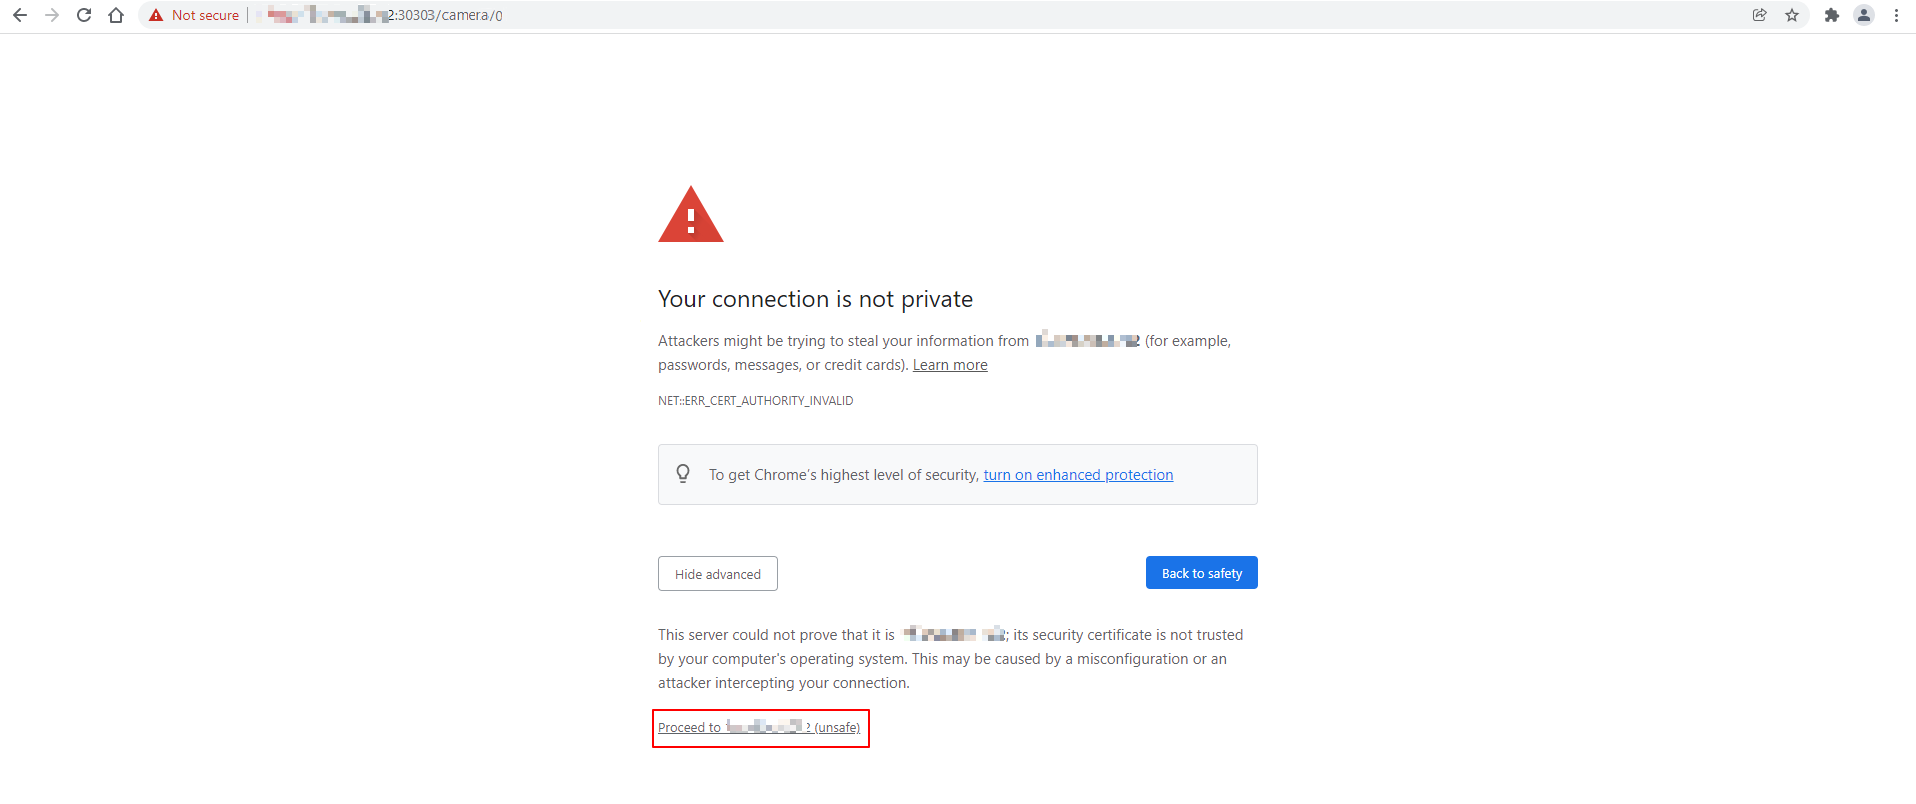 A browser window using the Camera URL and showing a warning message “Your connection is not private”. The option to Proceed to the website is outlined in red, indicating you should click the link. 